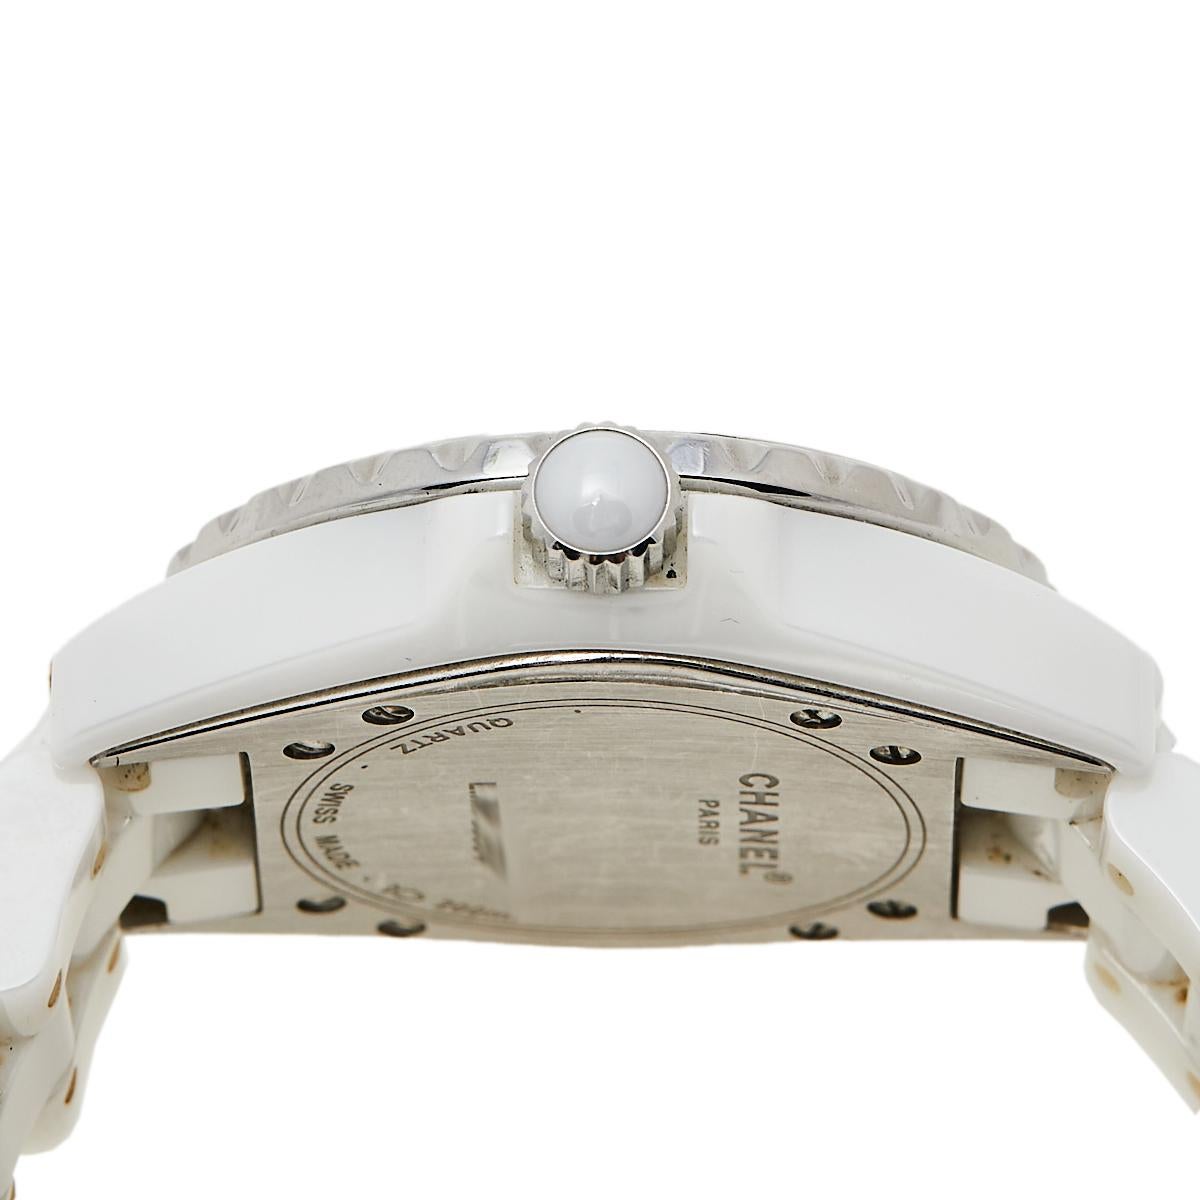 Contemporary Chanel White Ceramic and Stainless Steel Diamond J12 Women's Wristwatch 33 MM